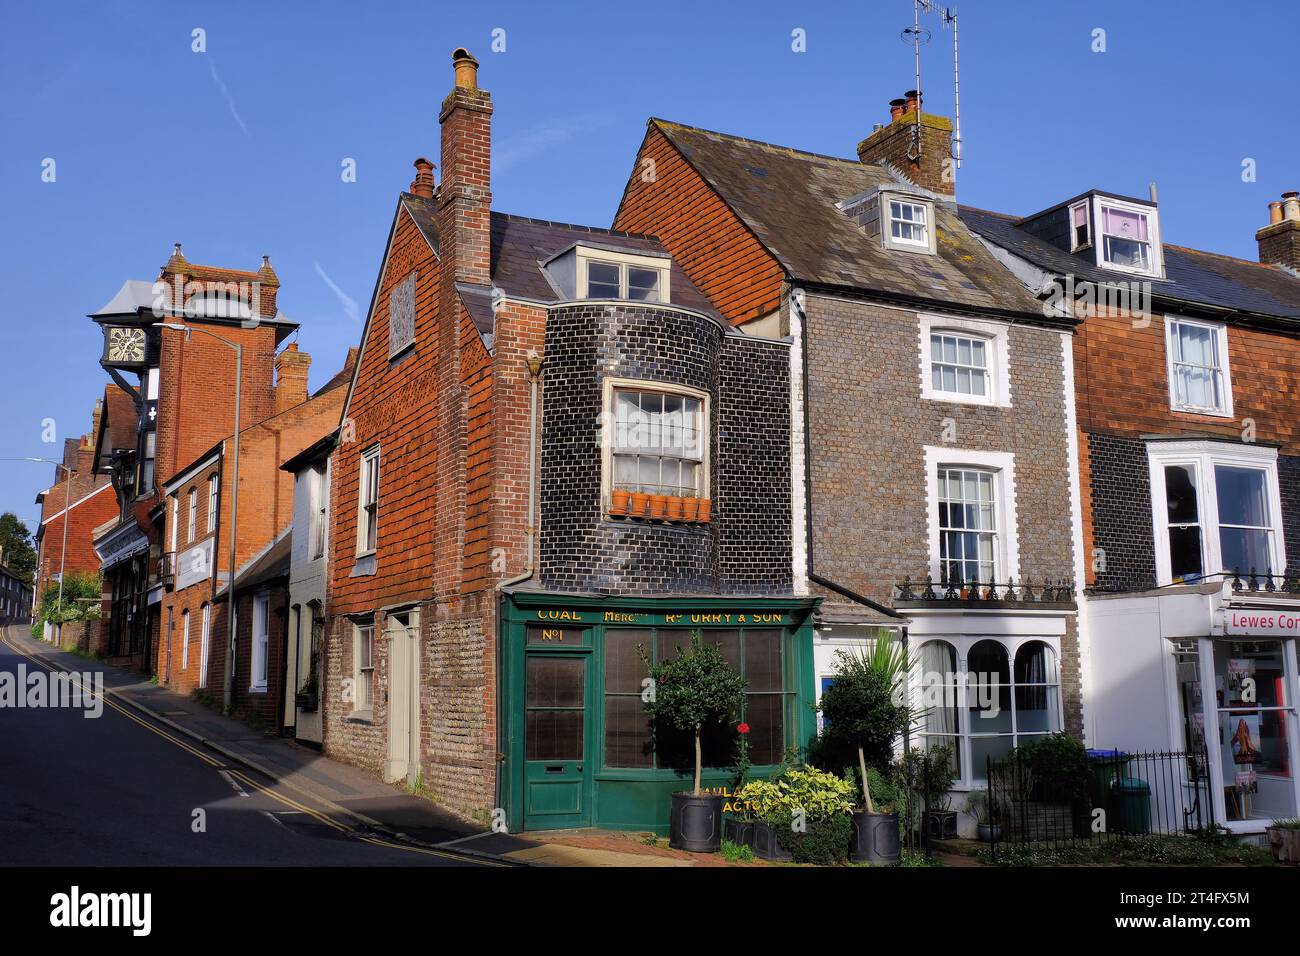 Lewes: Attractive period properties with characteristic black tiles on the façades along West Street in Lewes, East Sussex, England, UK Stock Photo